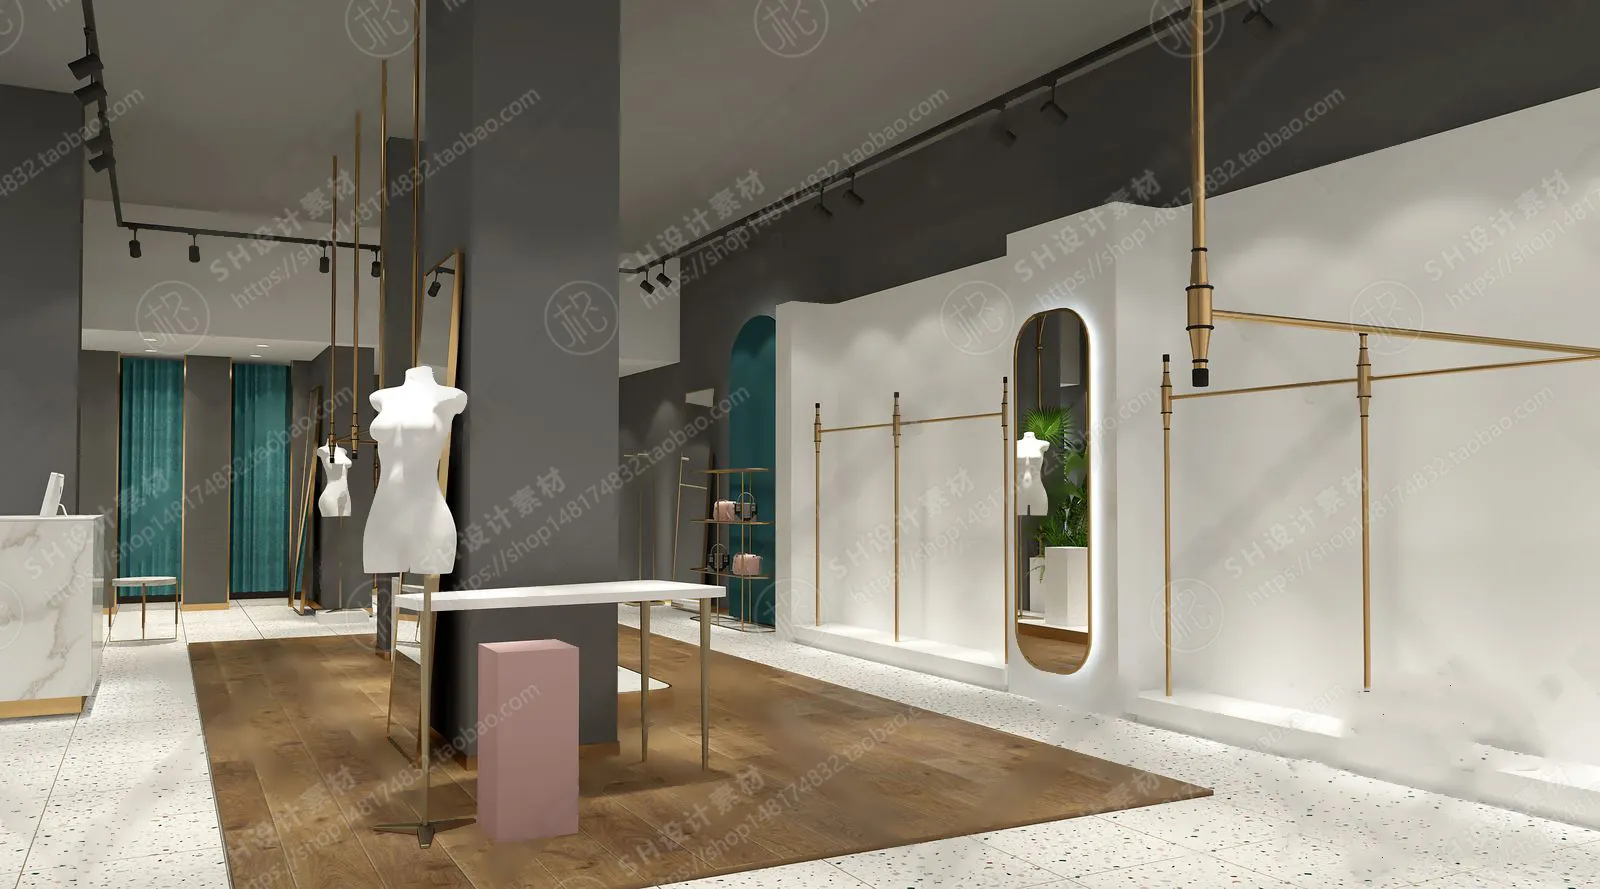 CLOTHING STORE 3D SCENES – VRAY RENDER – 14